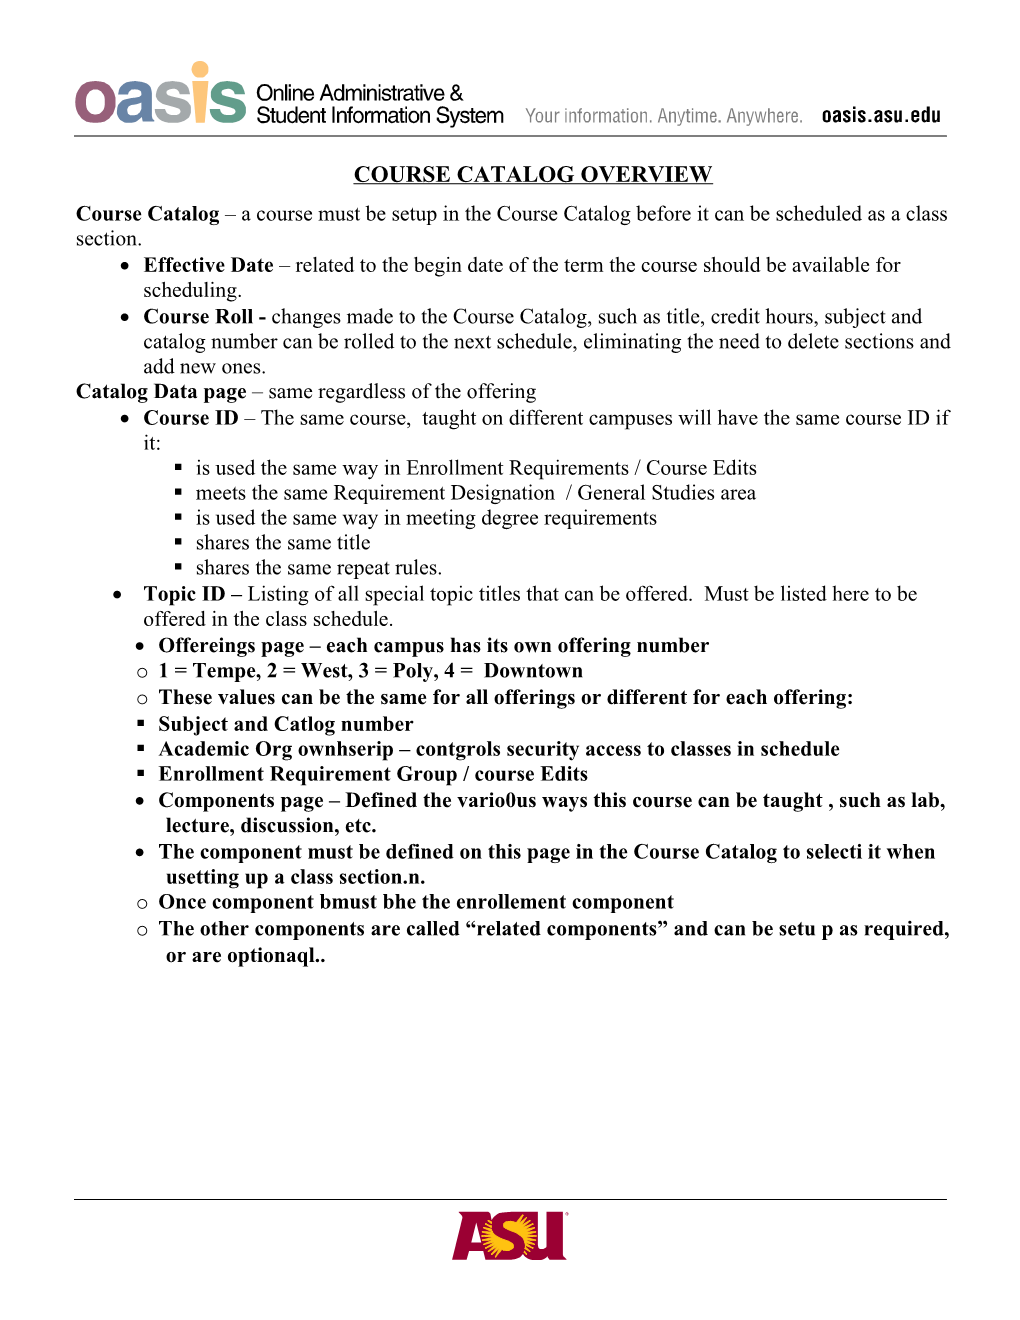 Course Catalog Overview